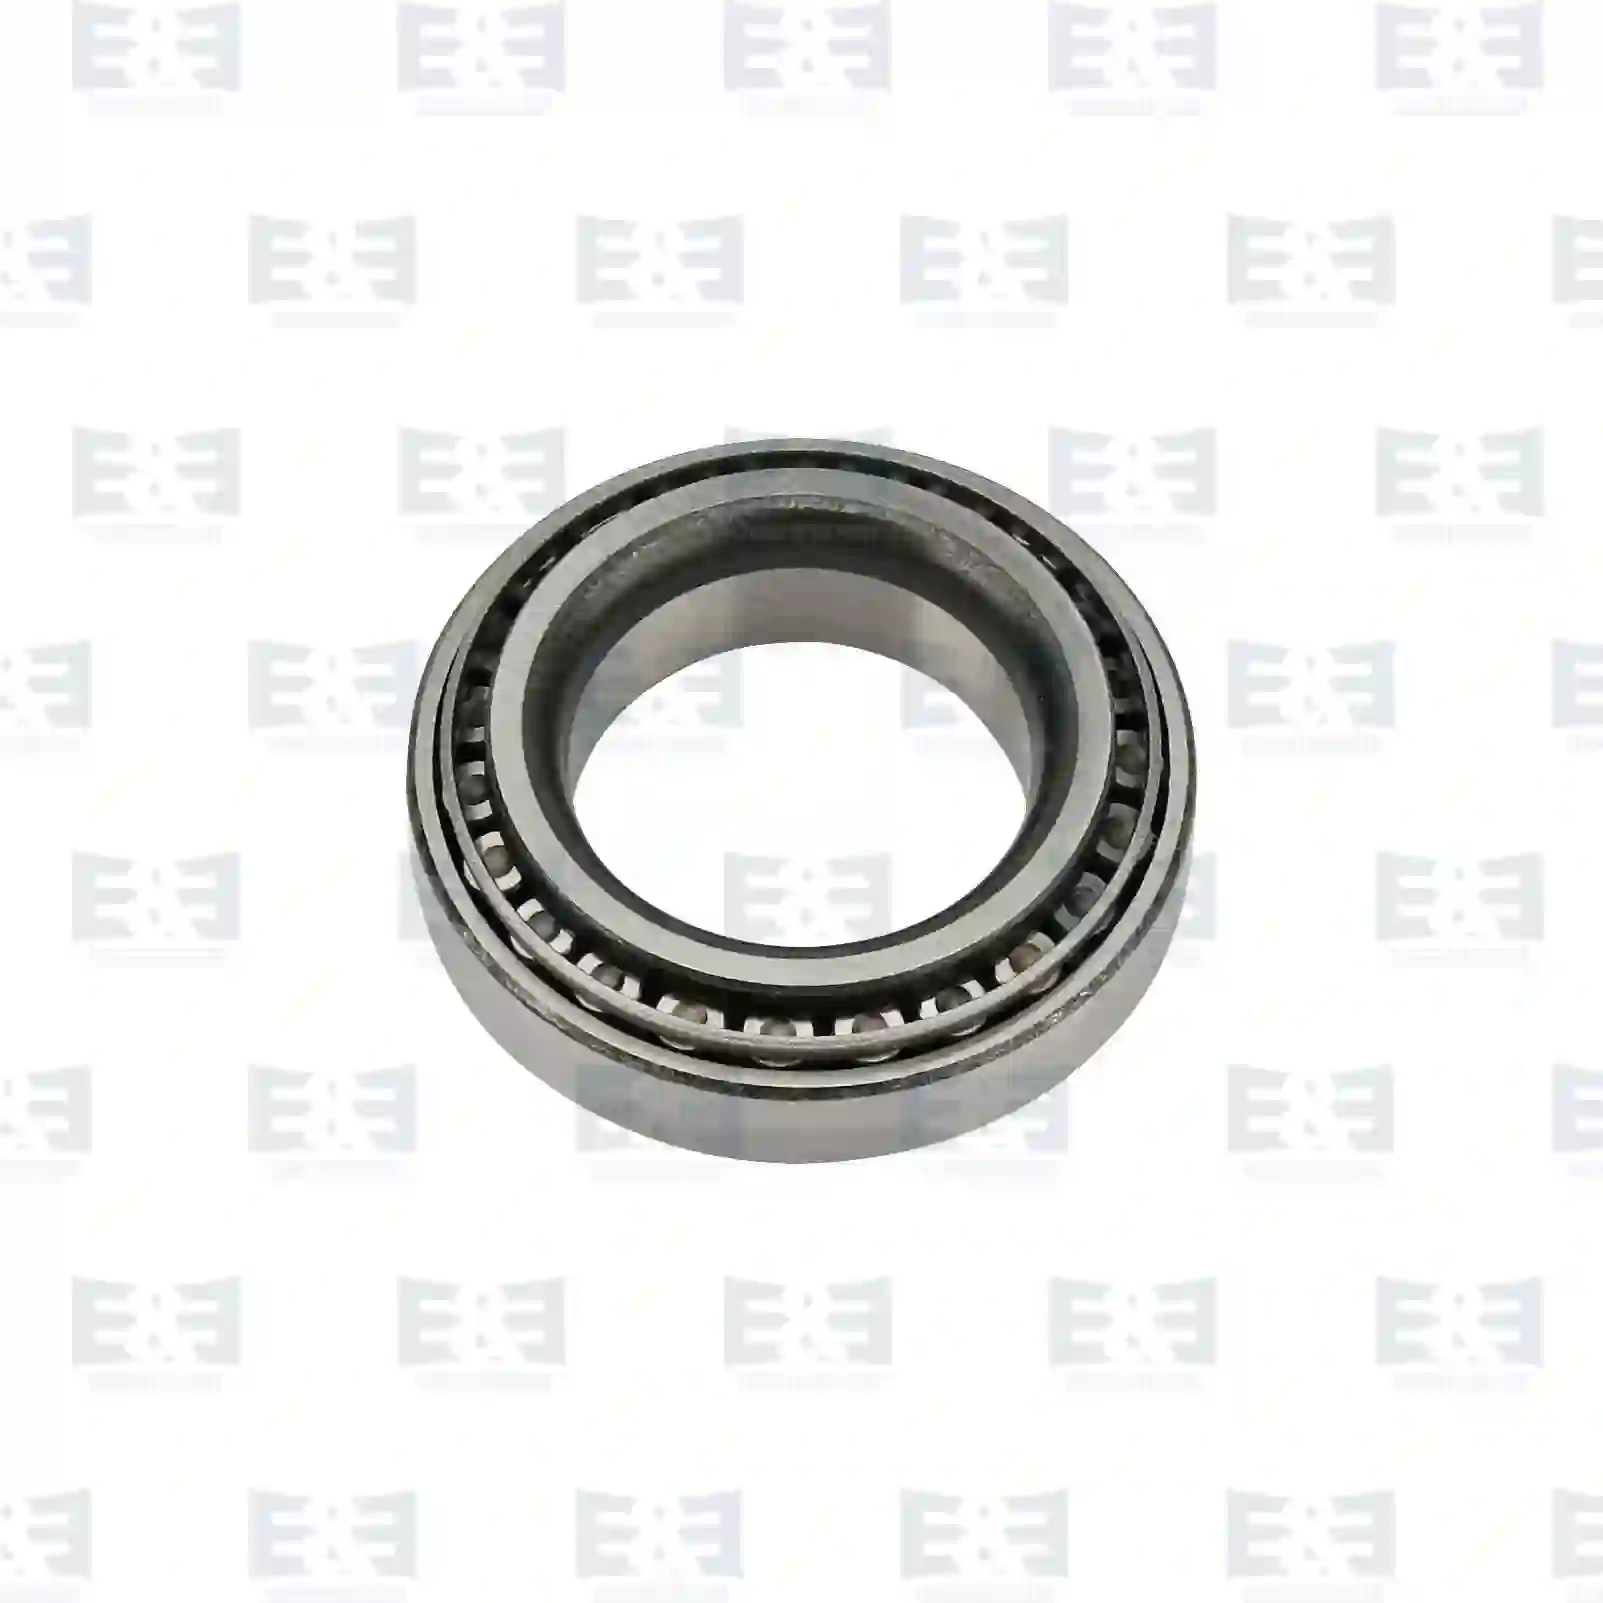 Tapered roller bearing, 2E2200297, 2310666, 2350443, 3683975, 3838045, 5097737AA, 5252823, 1513180, 9966510, CAC4999, 0F001-27350, 0K001-27350, F00127305, 0029801902, 99905906100, 893465, 308036, 90368-34083, 1835768, 1835776, 183578 ||  2E2200297 E&E Truck Spare Parts | Truck Spare Parts, Auotomotive Spare Parts Tapered roller bearing, 2E2200297, 2310666, 2350443, 3683975, 3838045, 5097737AA, 5252823, 1513180, 9966510, CAC4999, 0F001-27350, 0K001-27350, F00127305, 0029801902, 99905906100, 893465, 308036, 90368-34083, 1835768, 1835776, 183578 ||  2E2200297 E&E Truck Spare Parts | Truck Spare Parts, Auotomotive Spare Parts